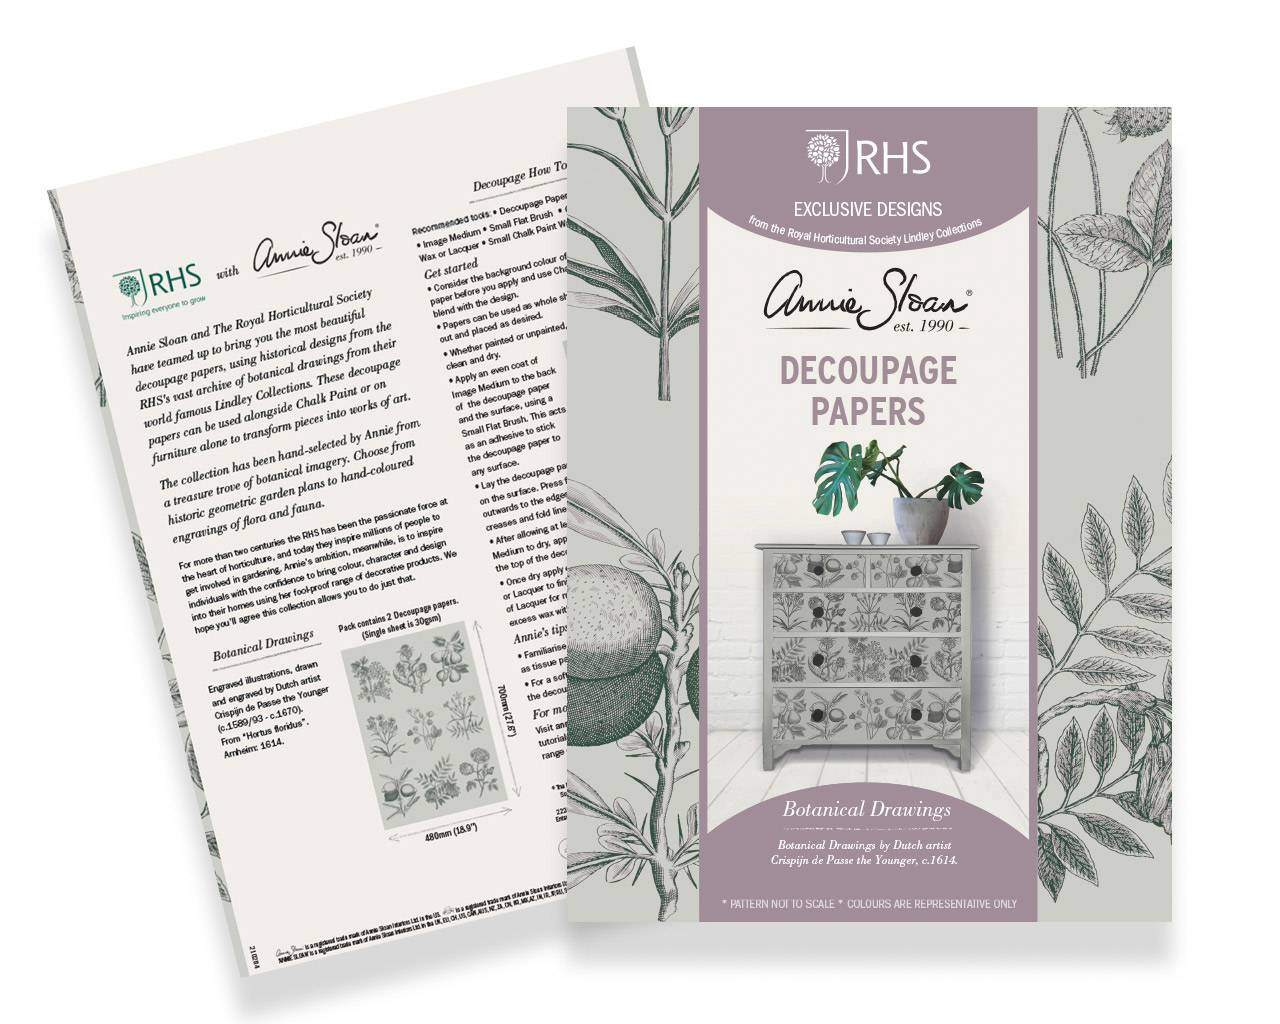 Botanical drawings decoupage papers by Annie Sloan and RHS - product shot